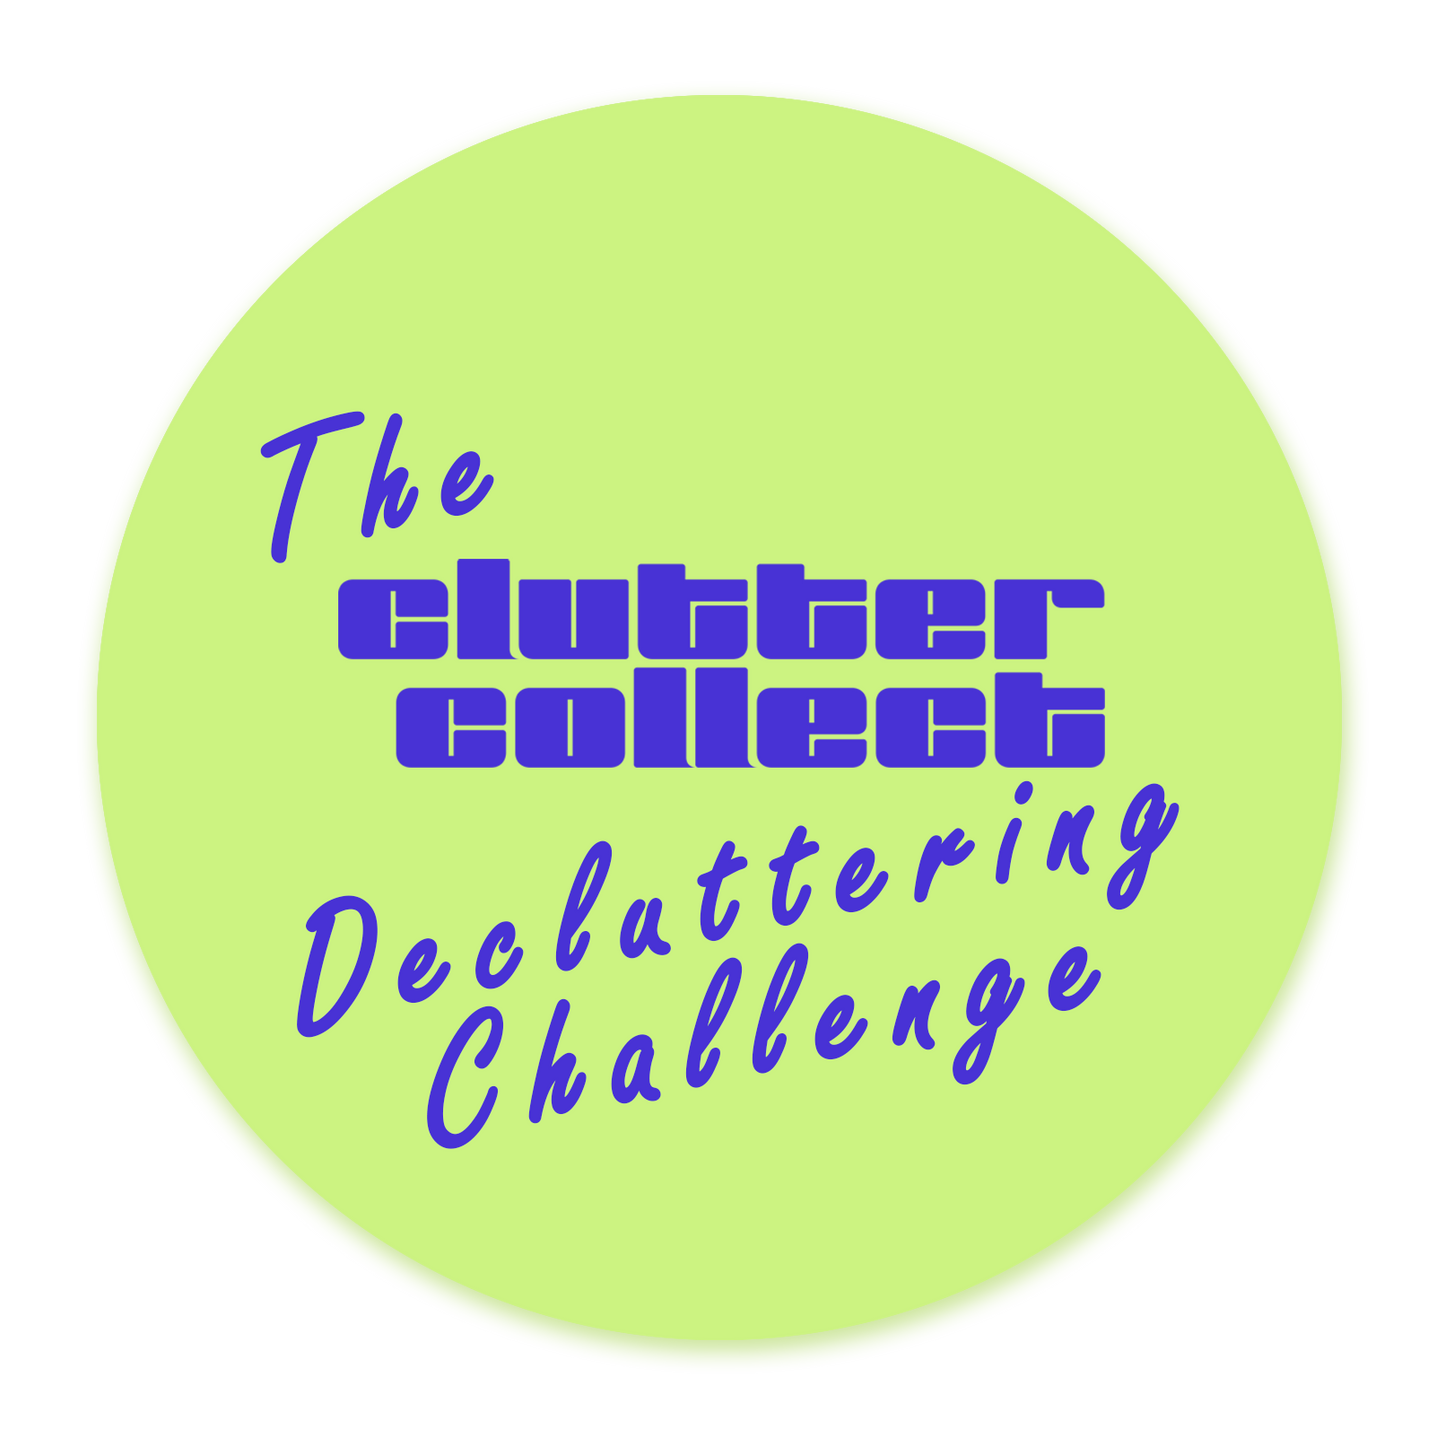 The Clutter Collect Decluttering Challenge